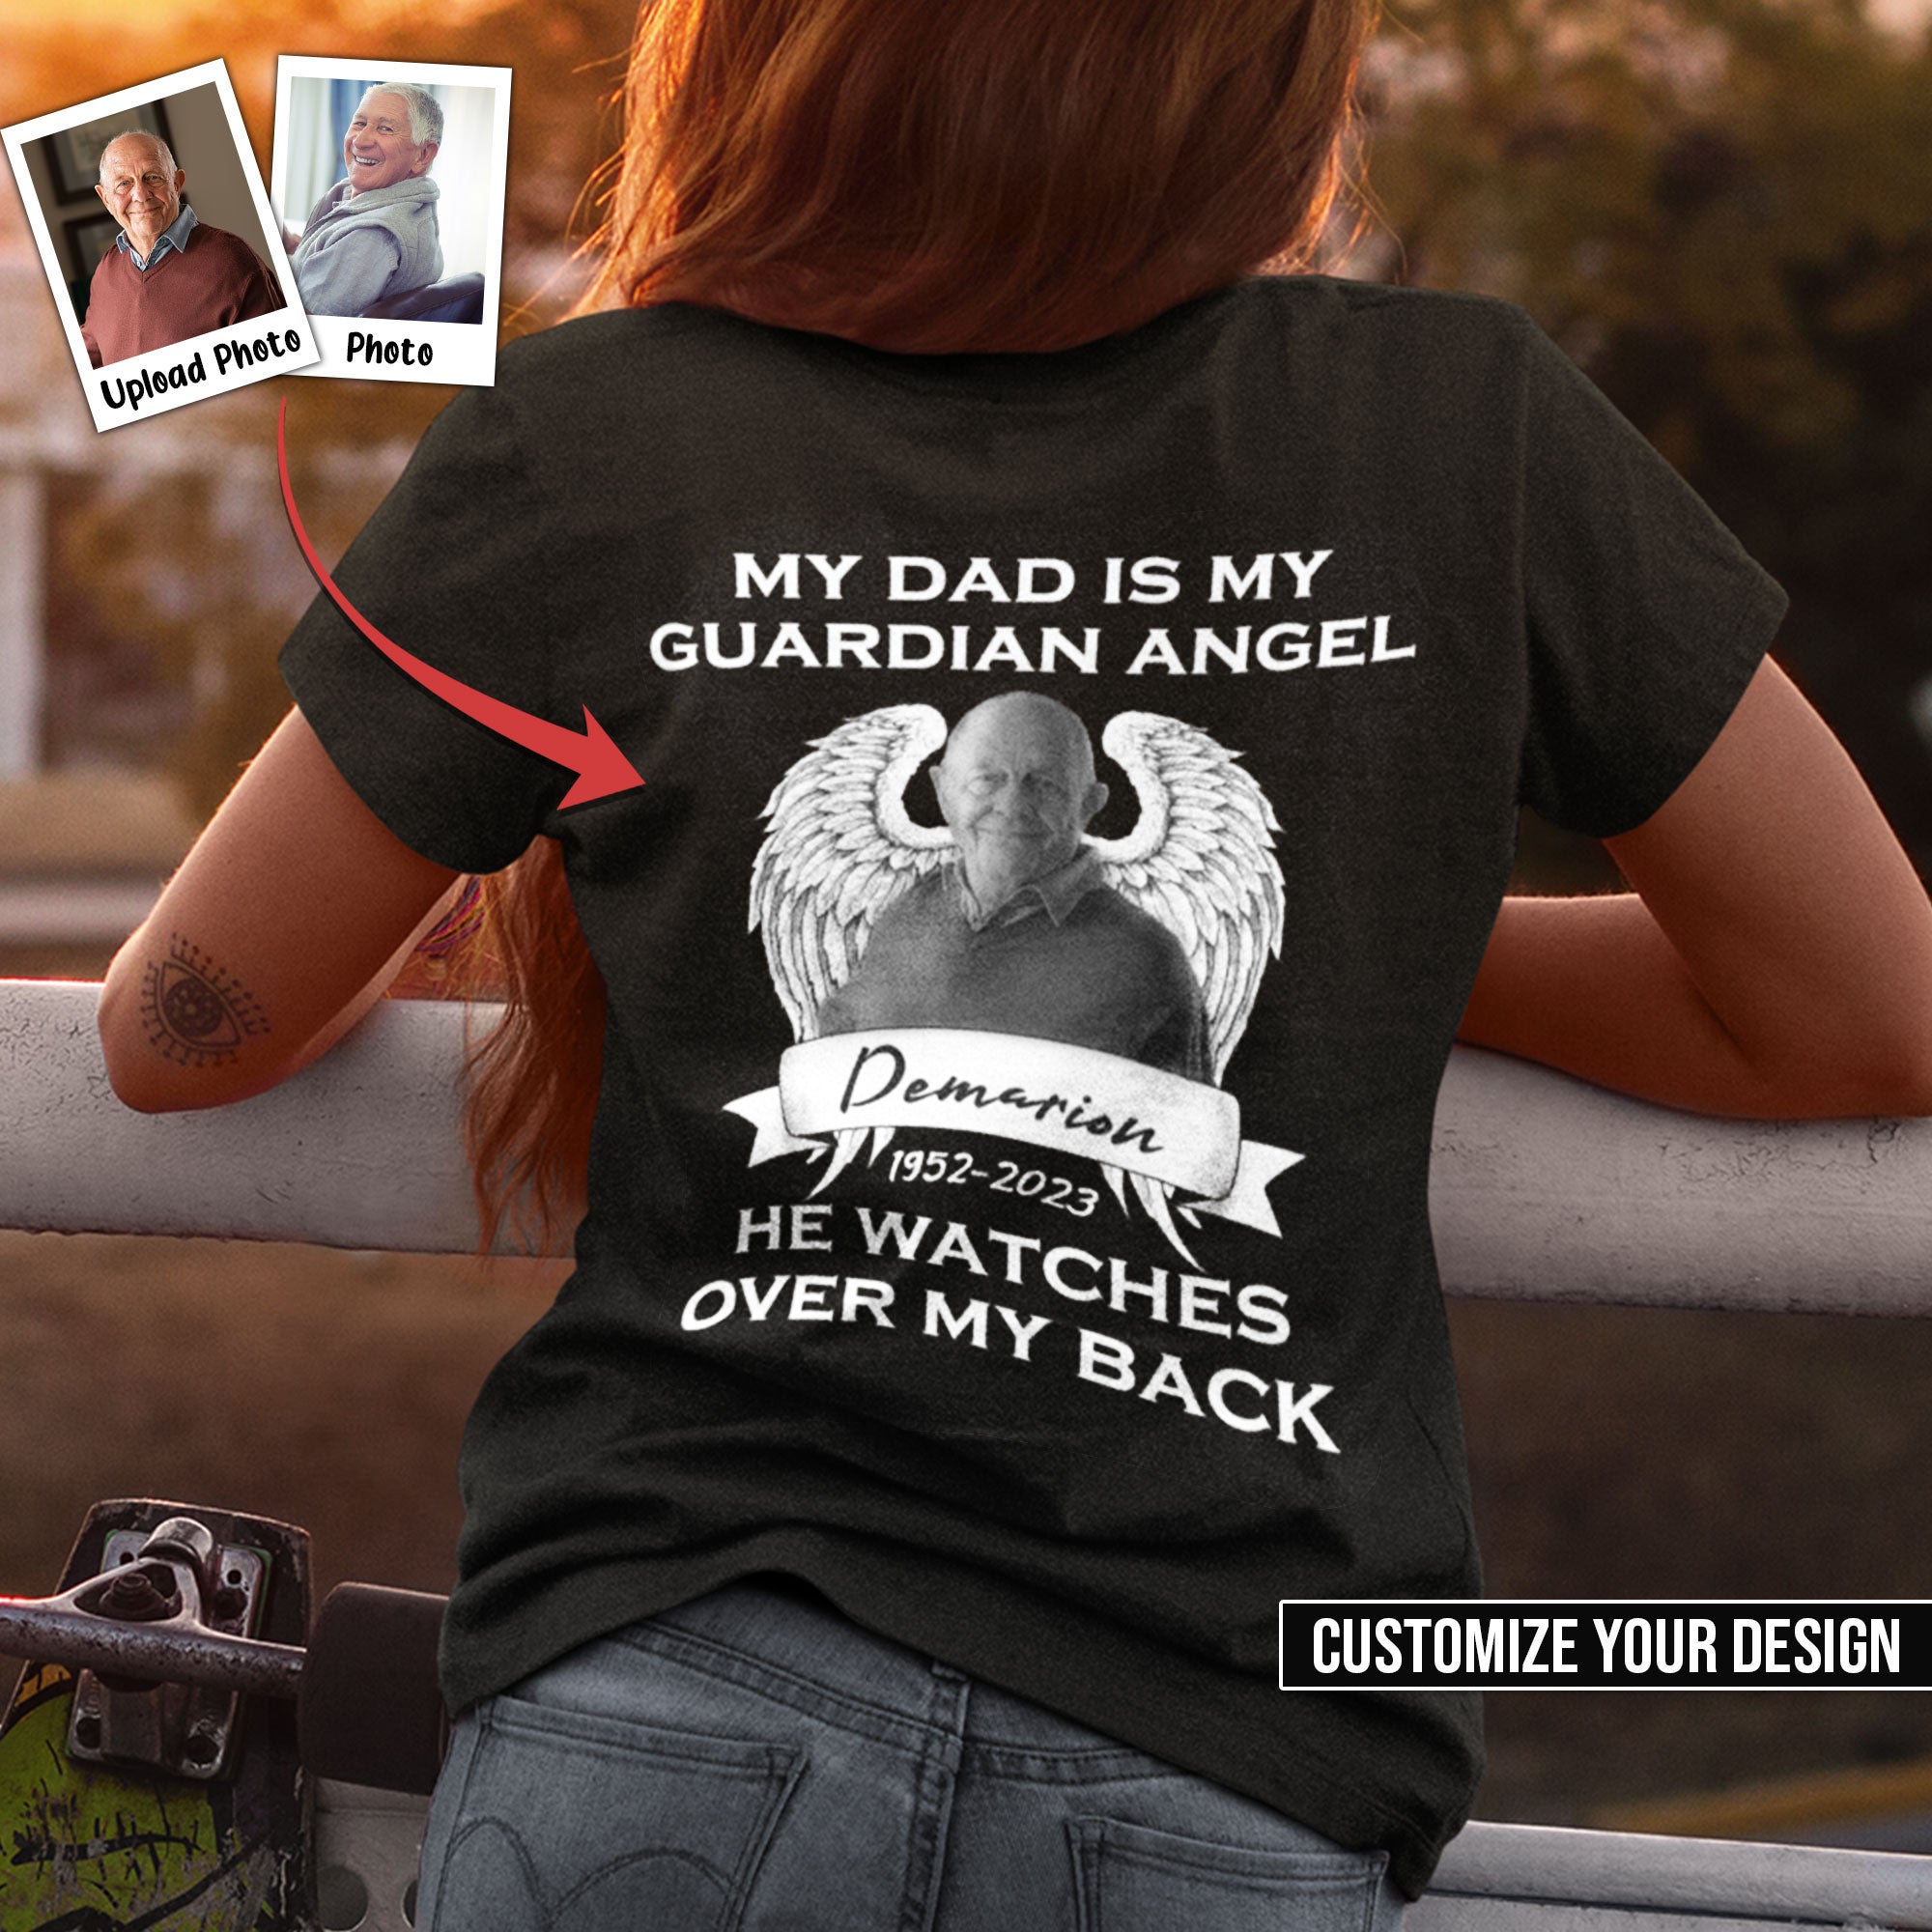 My Loved Ones Is My Guardian Angel - Personalized Back Printed T-Shirt